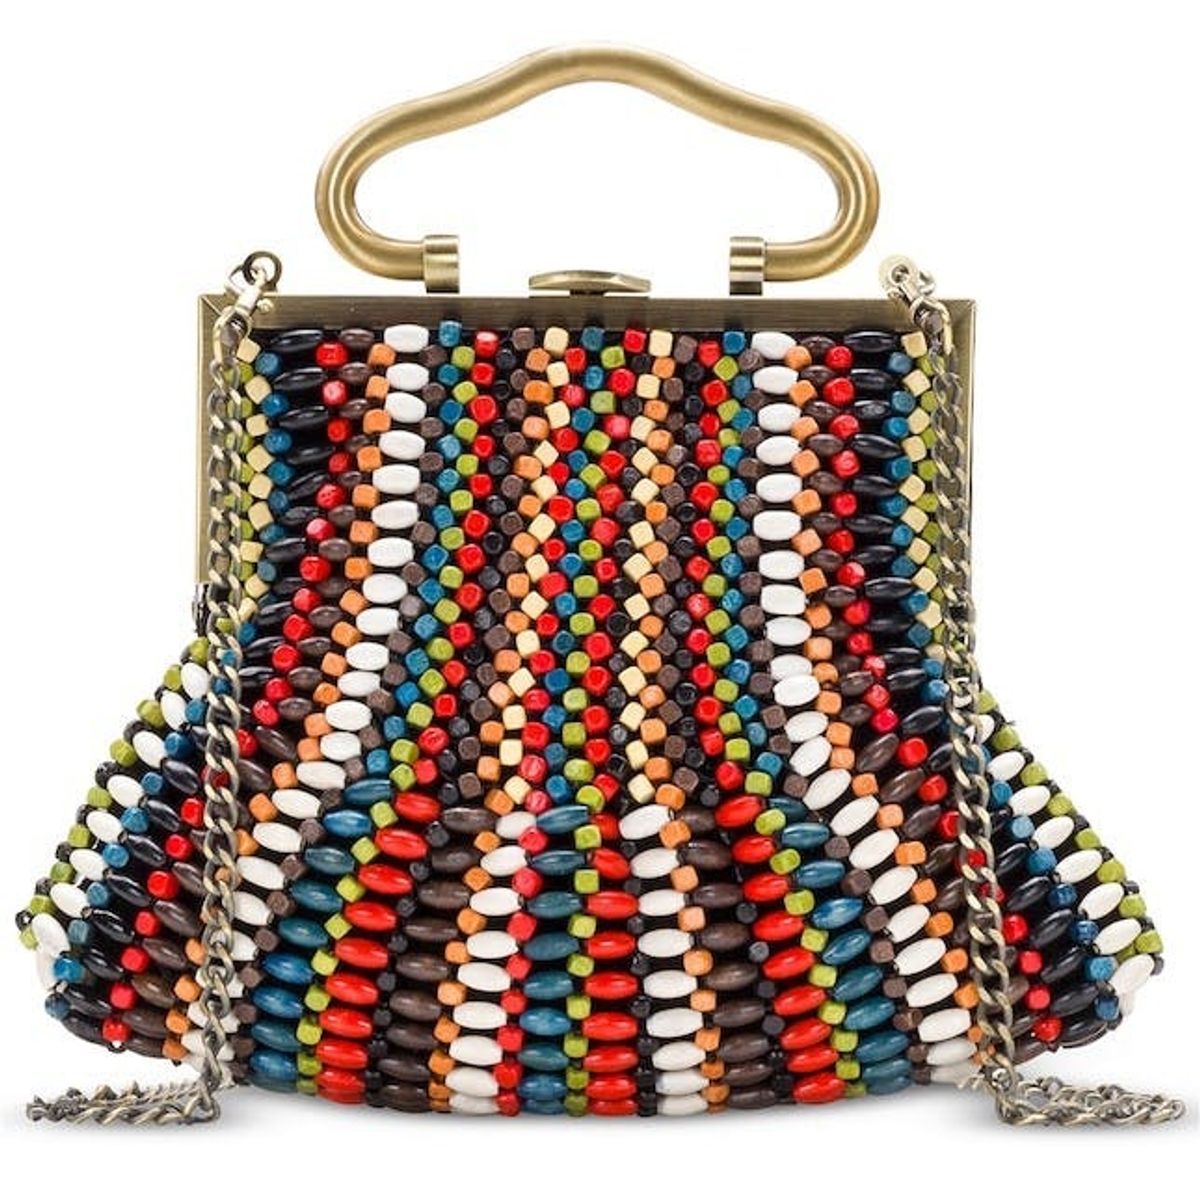 12 Beaded Bags That Will Replace Your Straw Bag This Summer